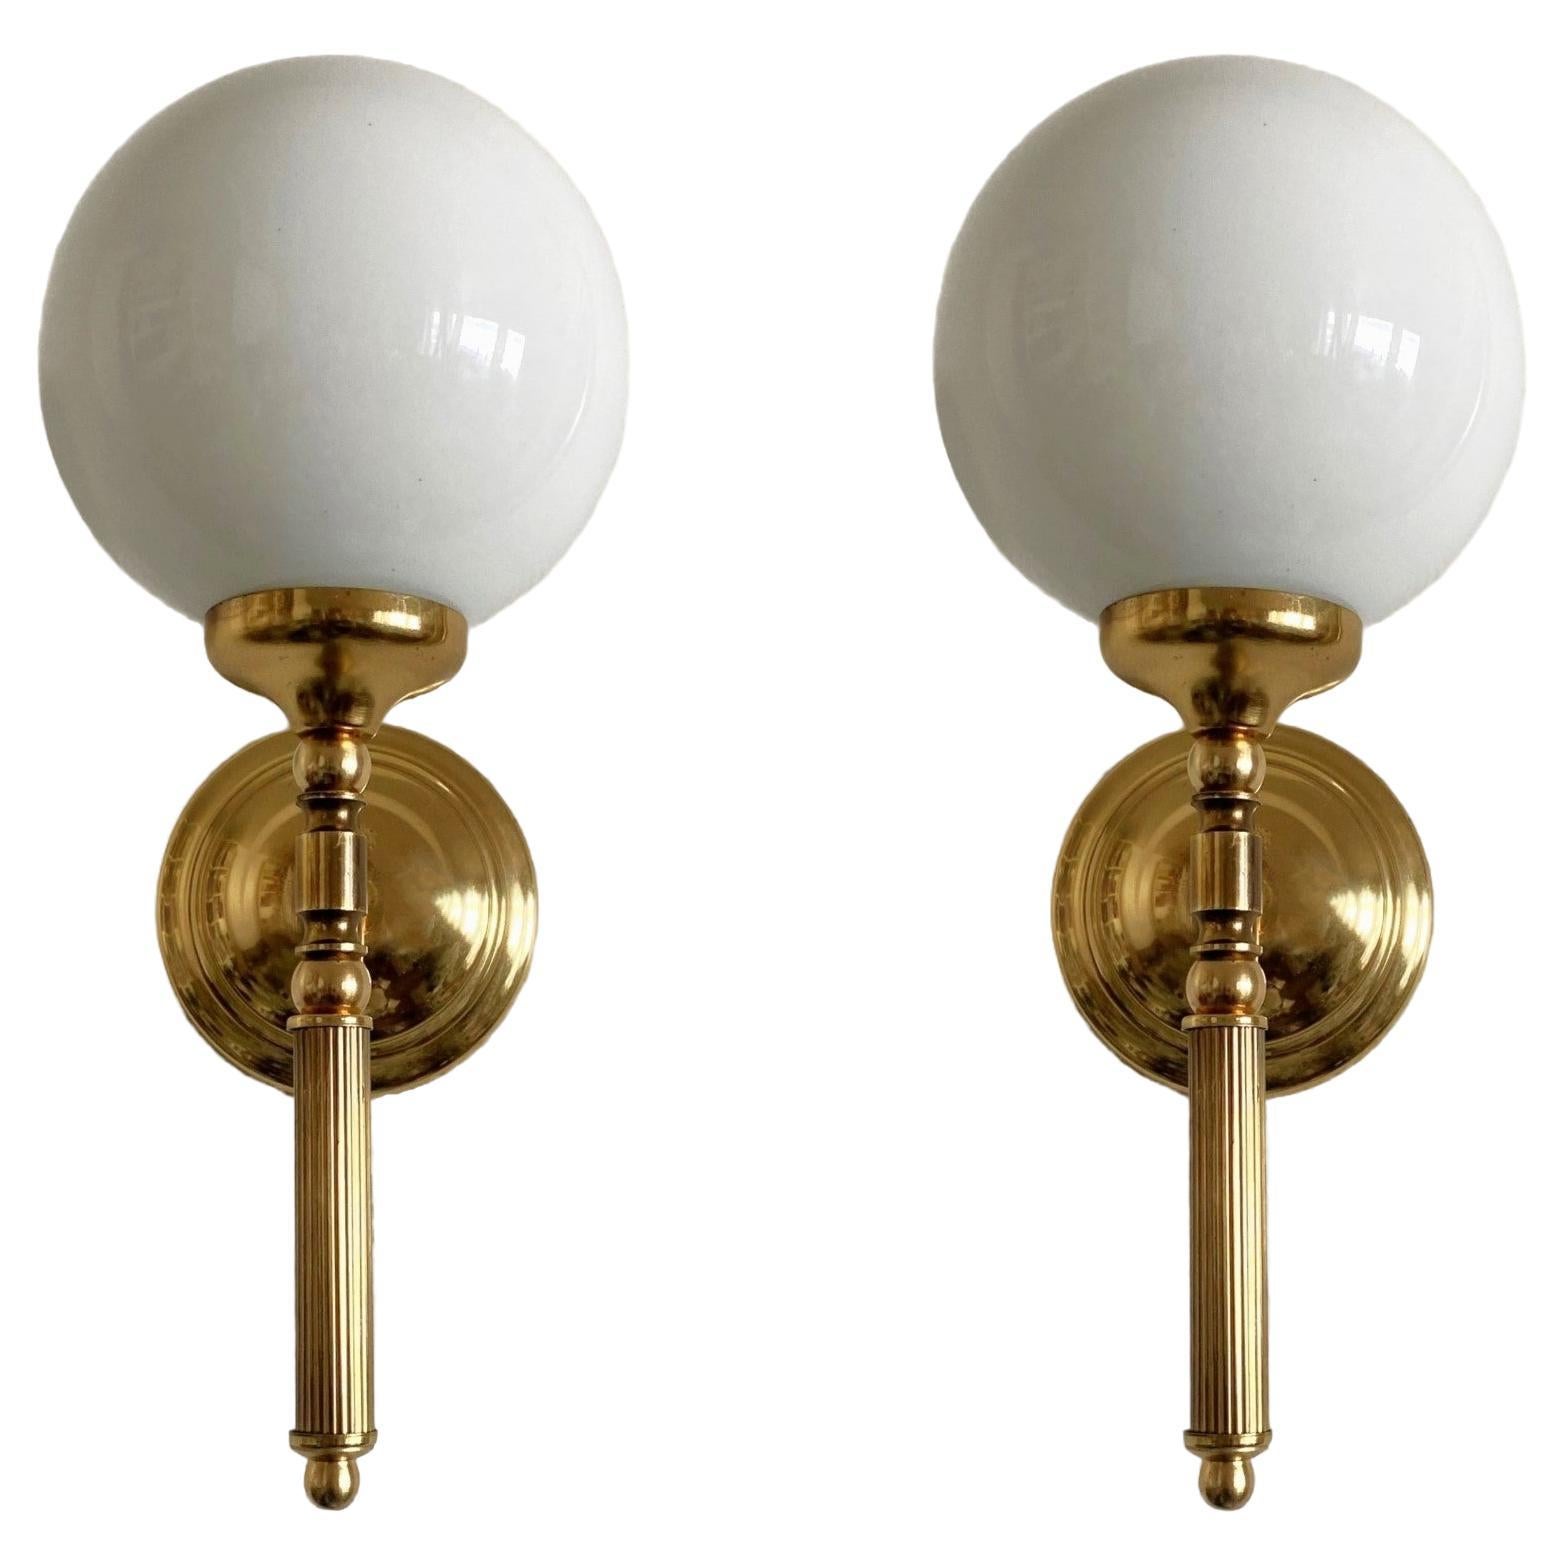 A pair of Art Deco torchiere wall lights n Maison Janson style, France, 1950s. Elegant design in gilt brass with hand-blown opaline glass ball globes. 
Both pieces in fine vintage condition, glass globes without chips or cracks, aged patina to